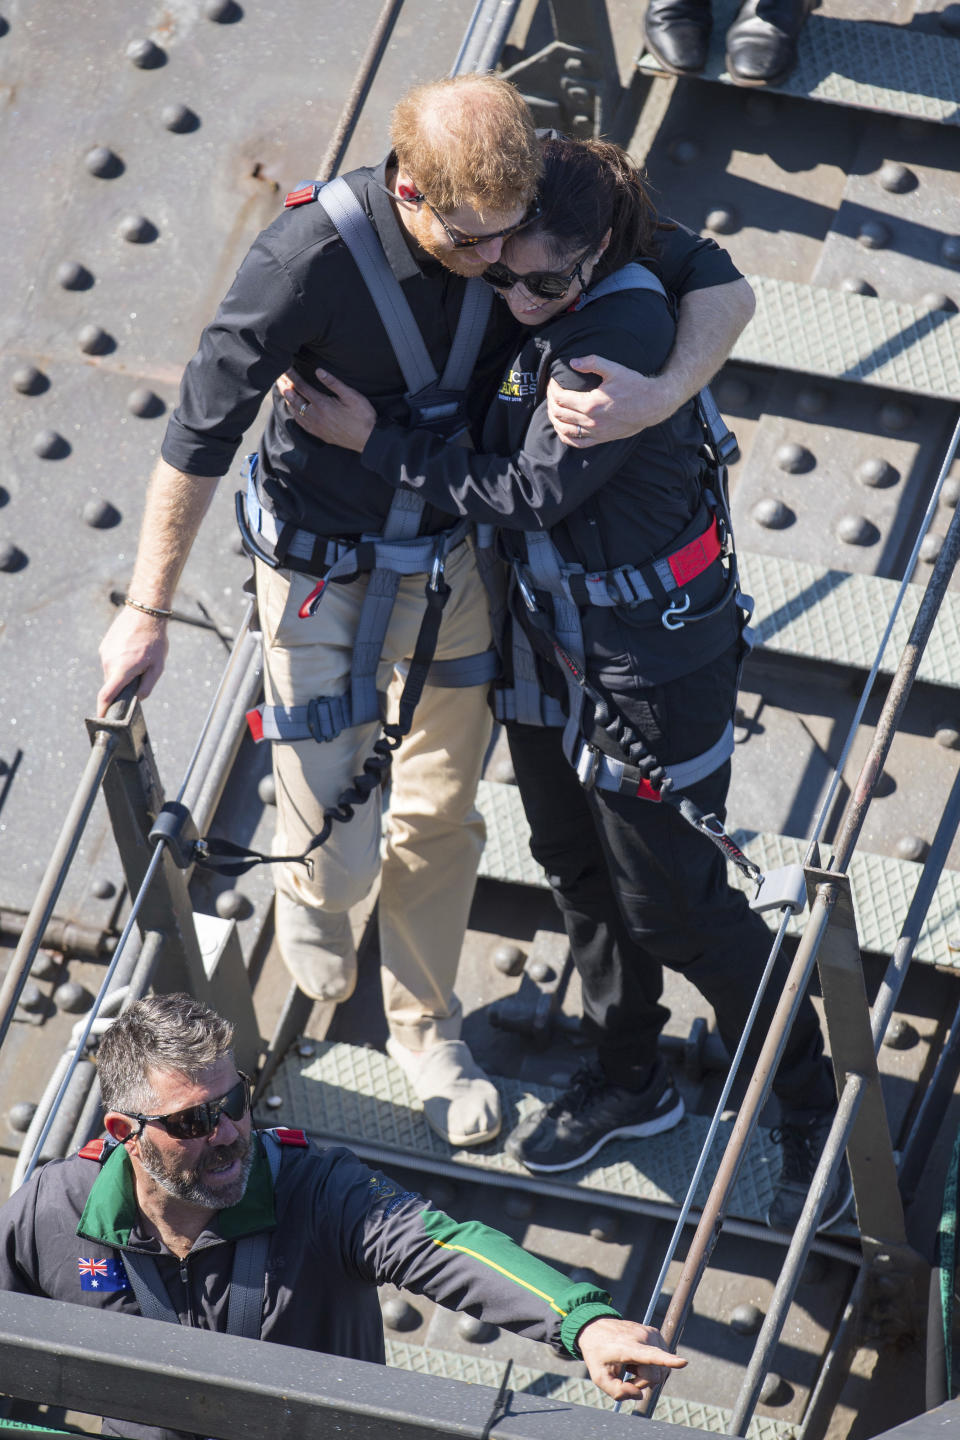 Britain’s Prince Harry, left, hugs a fellow climber during a visit to the Sydney Harbour Bridge with Prime Minister of Australia Scott Morrison and Invictus Games competitors in Sydney, Friday, Oct. 19, 2018. Prince Harry and his wife Meghan are on day four of their 16-day tour of Australia and the South Pacific.(Dominic Lipinski/Pool Photo via AP)